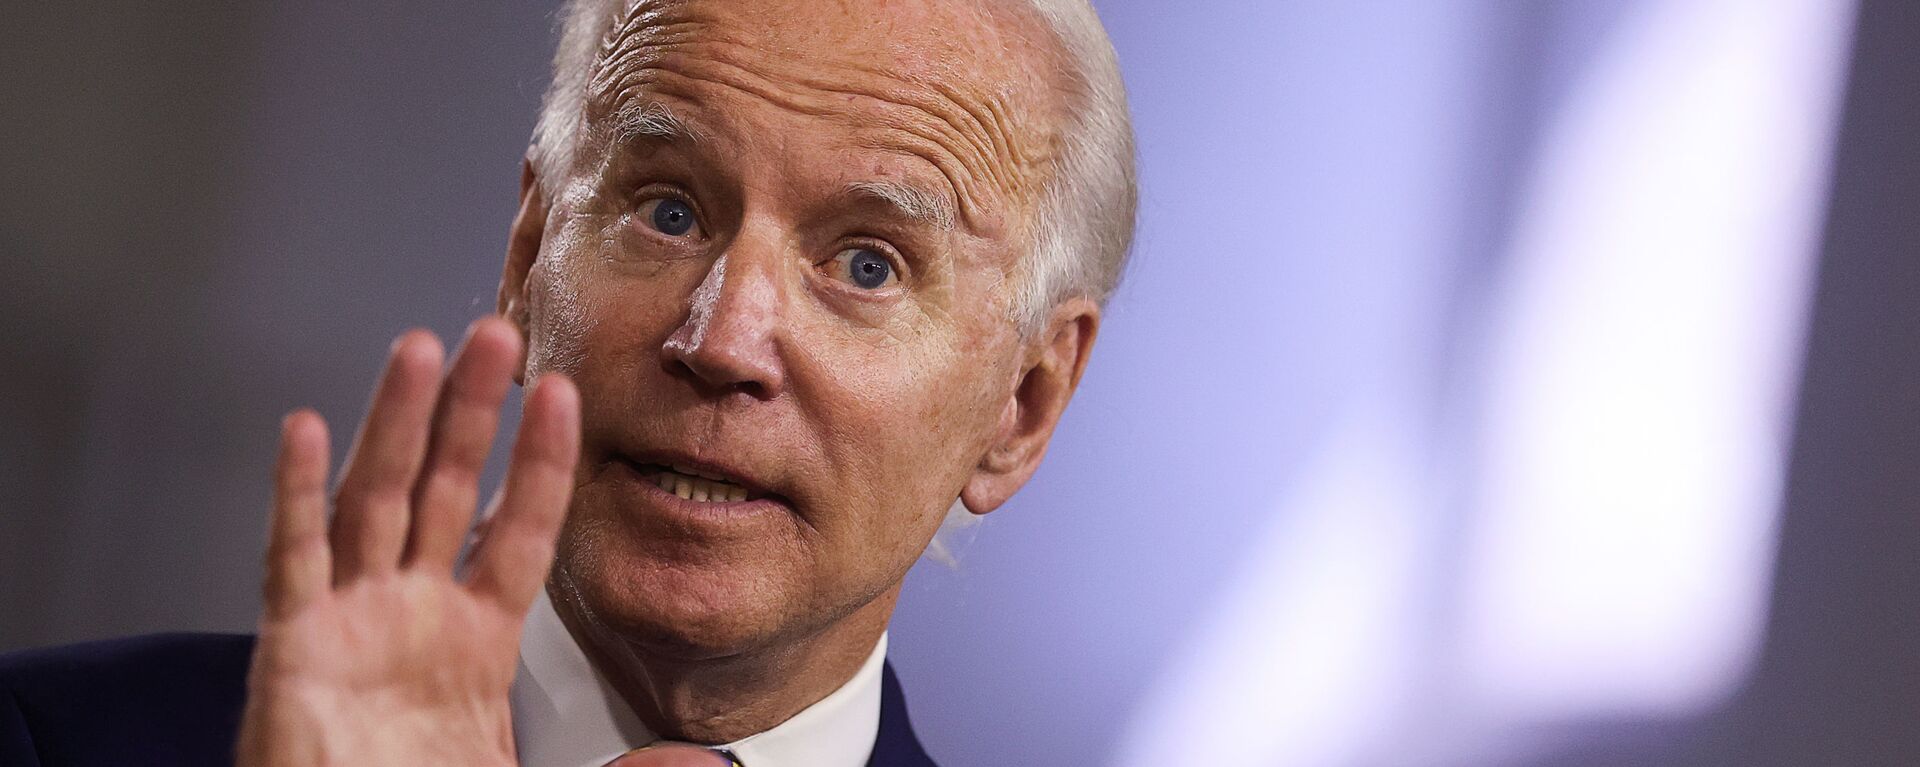 Democratic presidential candidate and former Vice President Joe Biden speaks about his plans to combat racial inequality at a campaign event in Wilmington, Delaware, U.S., July 28, 2020 - Sputnik International, 1920, 23.08.2020